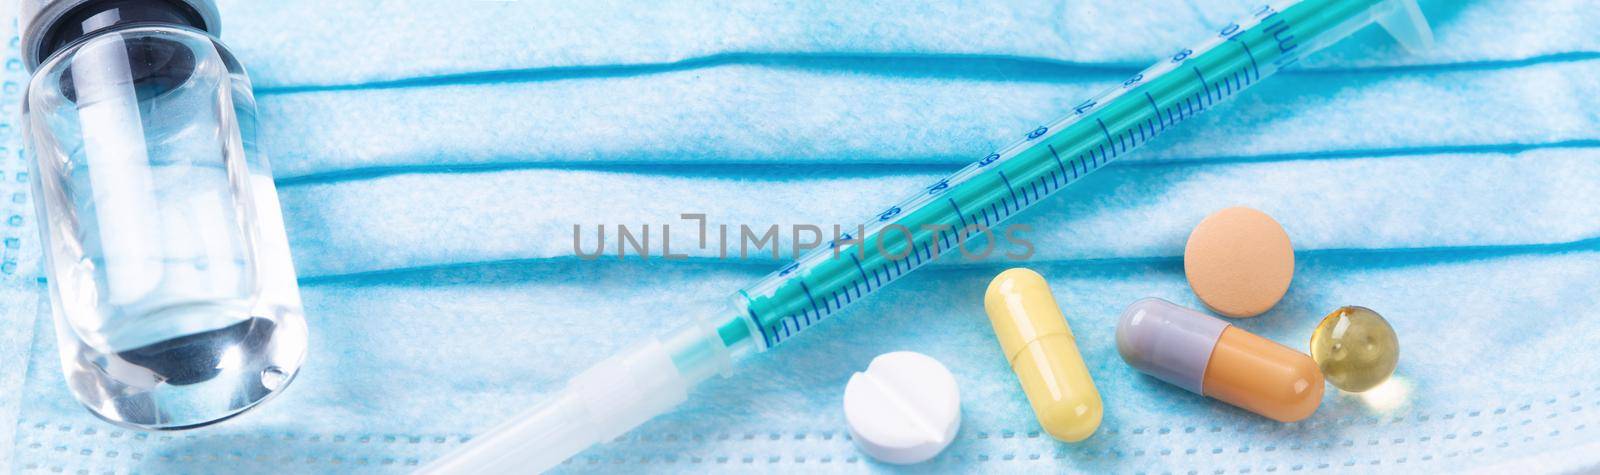 Medical syringe with a needle and pills. Corona virus vaccine. by Taut